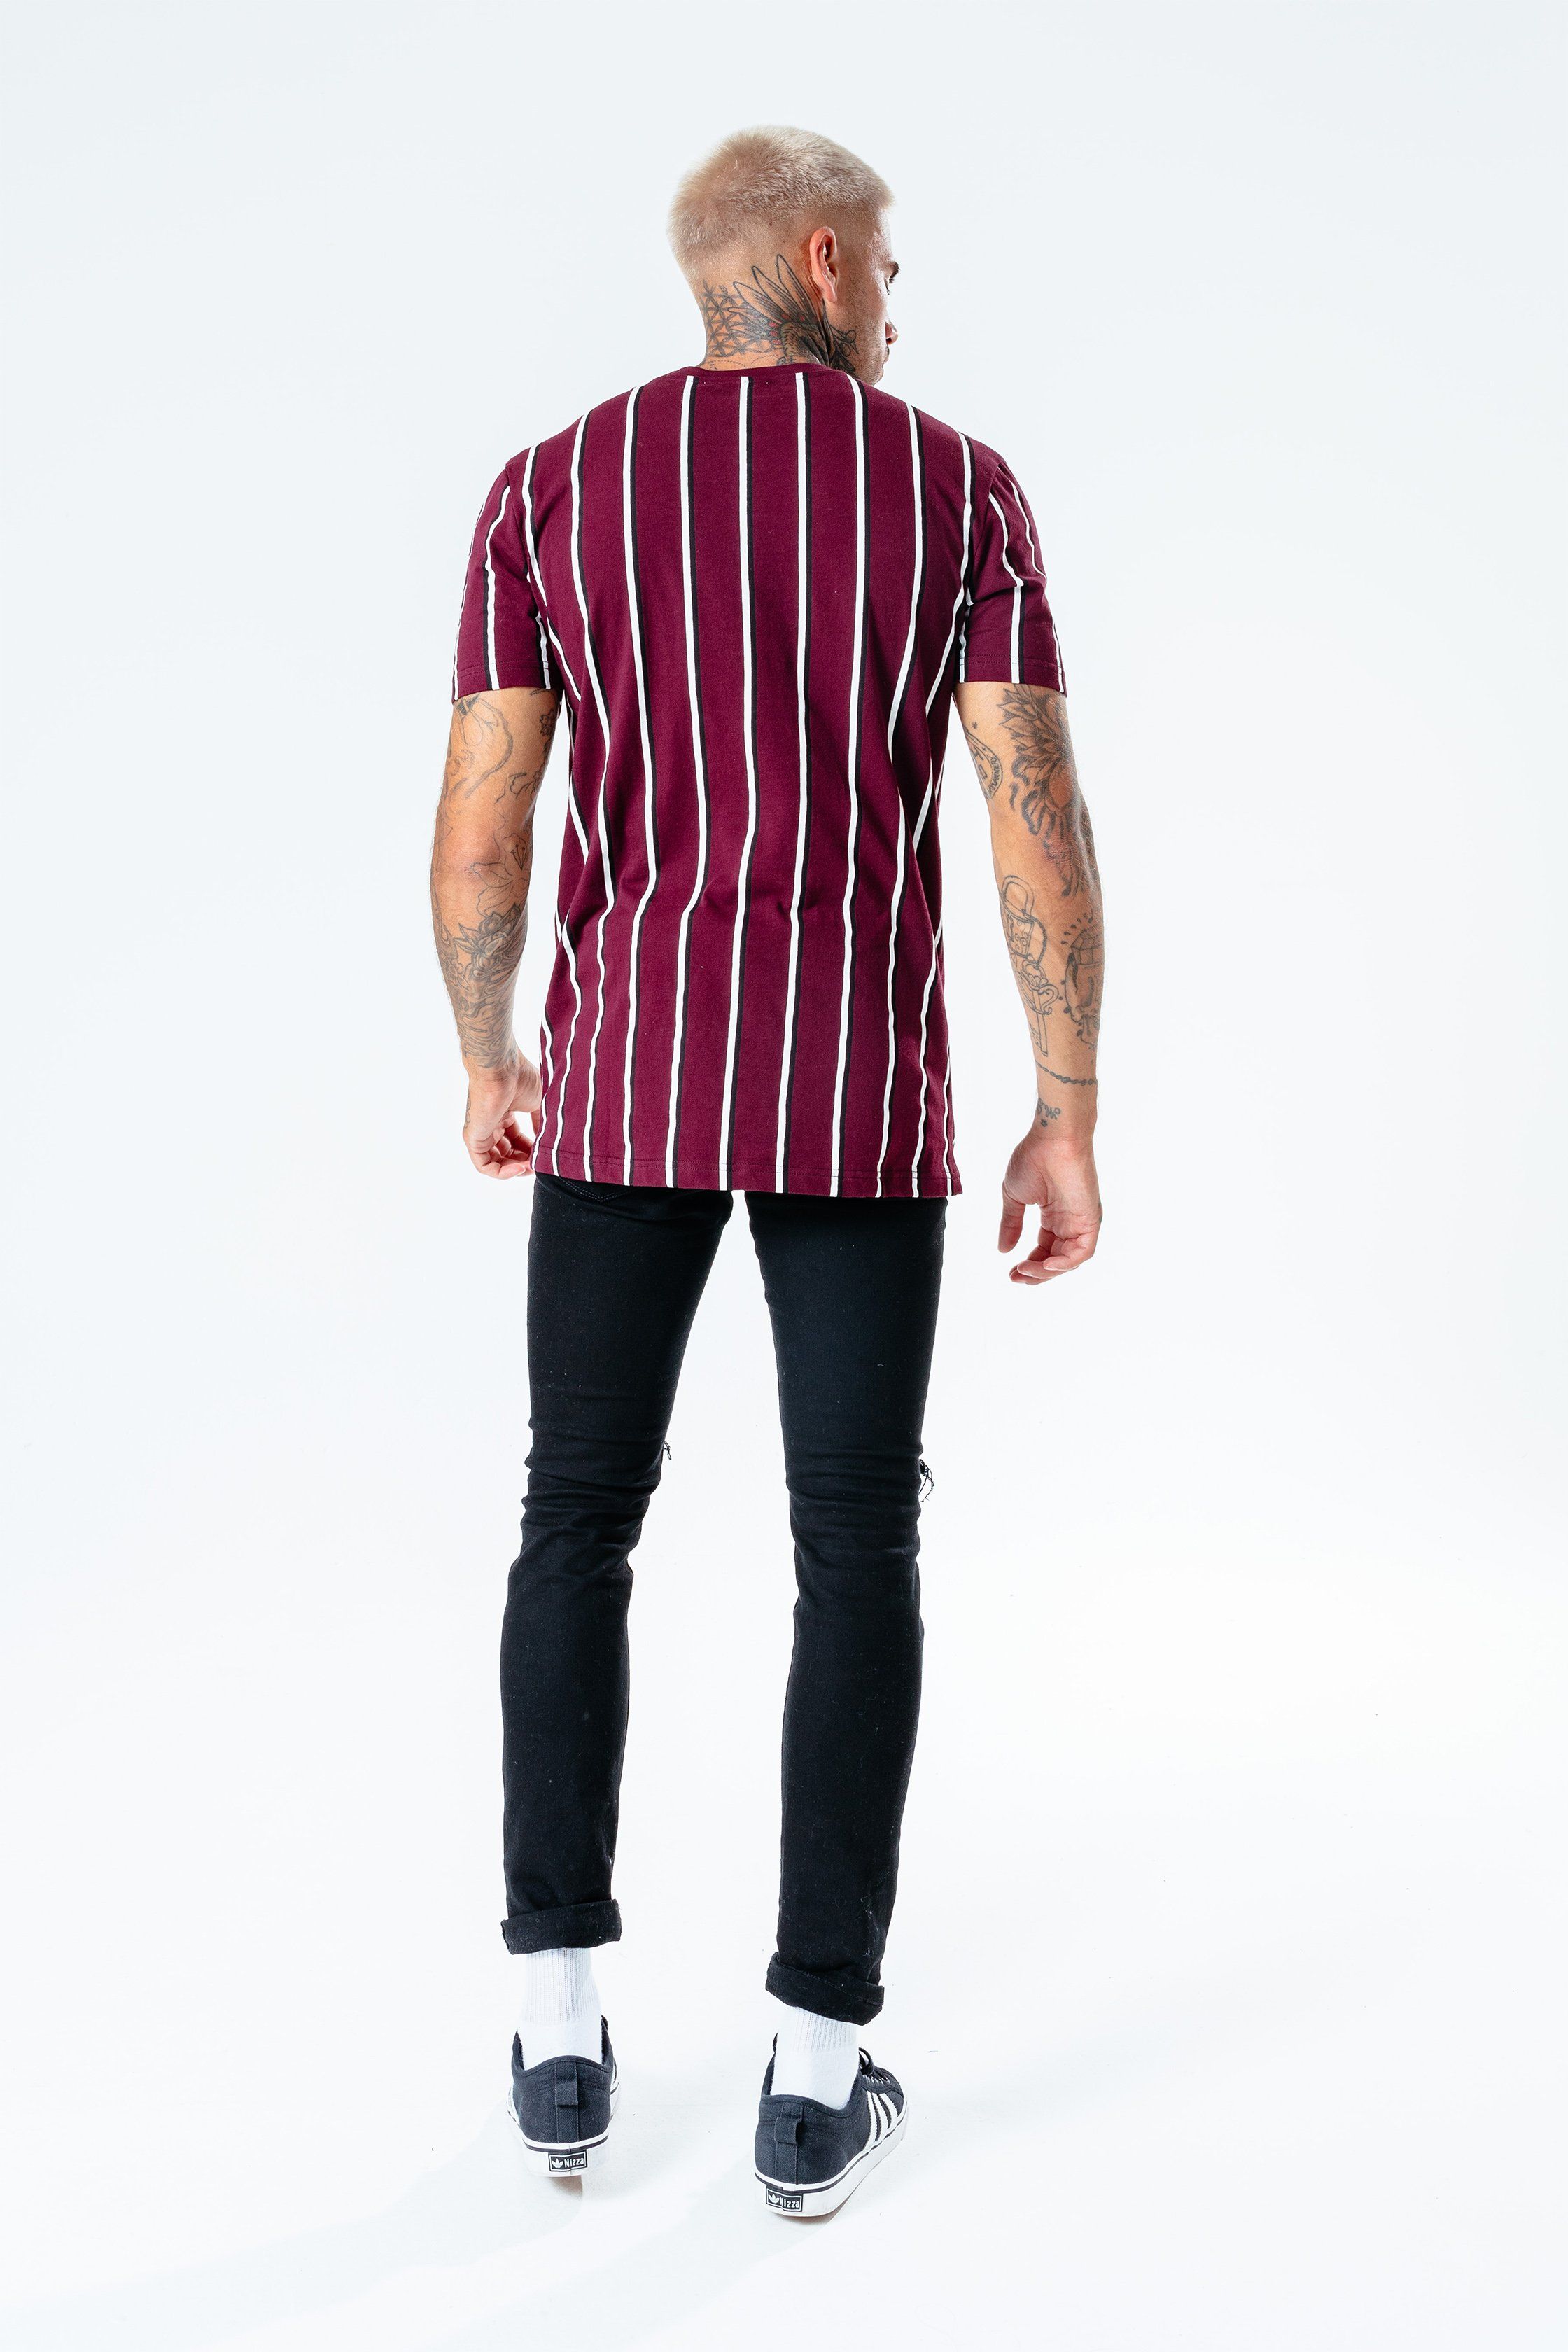 The HYPE. burgundy stripe men's t-shirt pairs perfectly with the HYPE. men's black joggers for an off-duty relaxed look. Coming in with a burgundy, white and black colour palette in an 100% cotton fabric base for supreme comfort. Designed in our standard men's tee shape, with a crew neckline and short sleeves. Finished with an embroidered embossed patch on the sleeve. Machine wash at 30 degrees.